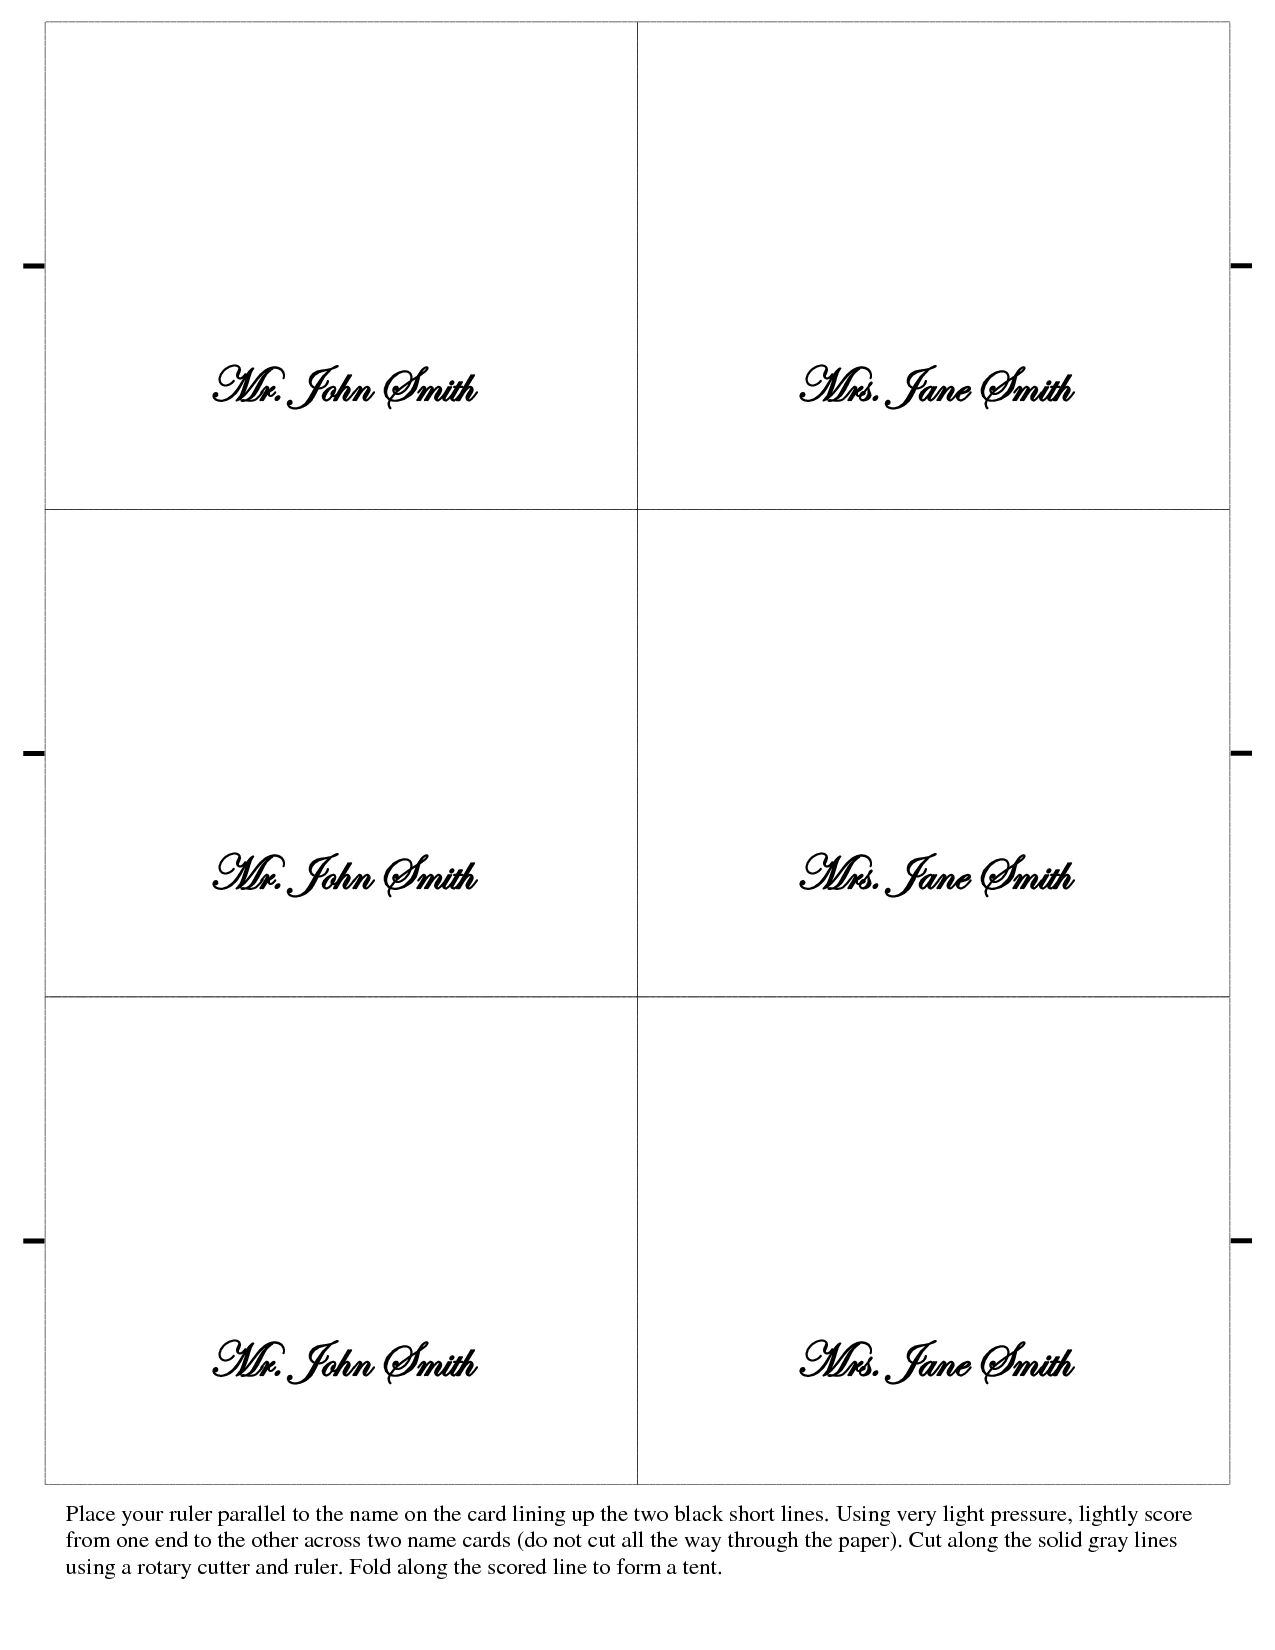 Free Place Card Templates 6 Per Page - Atlantaauctionco Pertaining To Place Card Template 6 Per Sheet